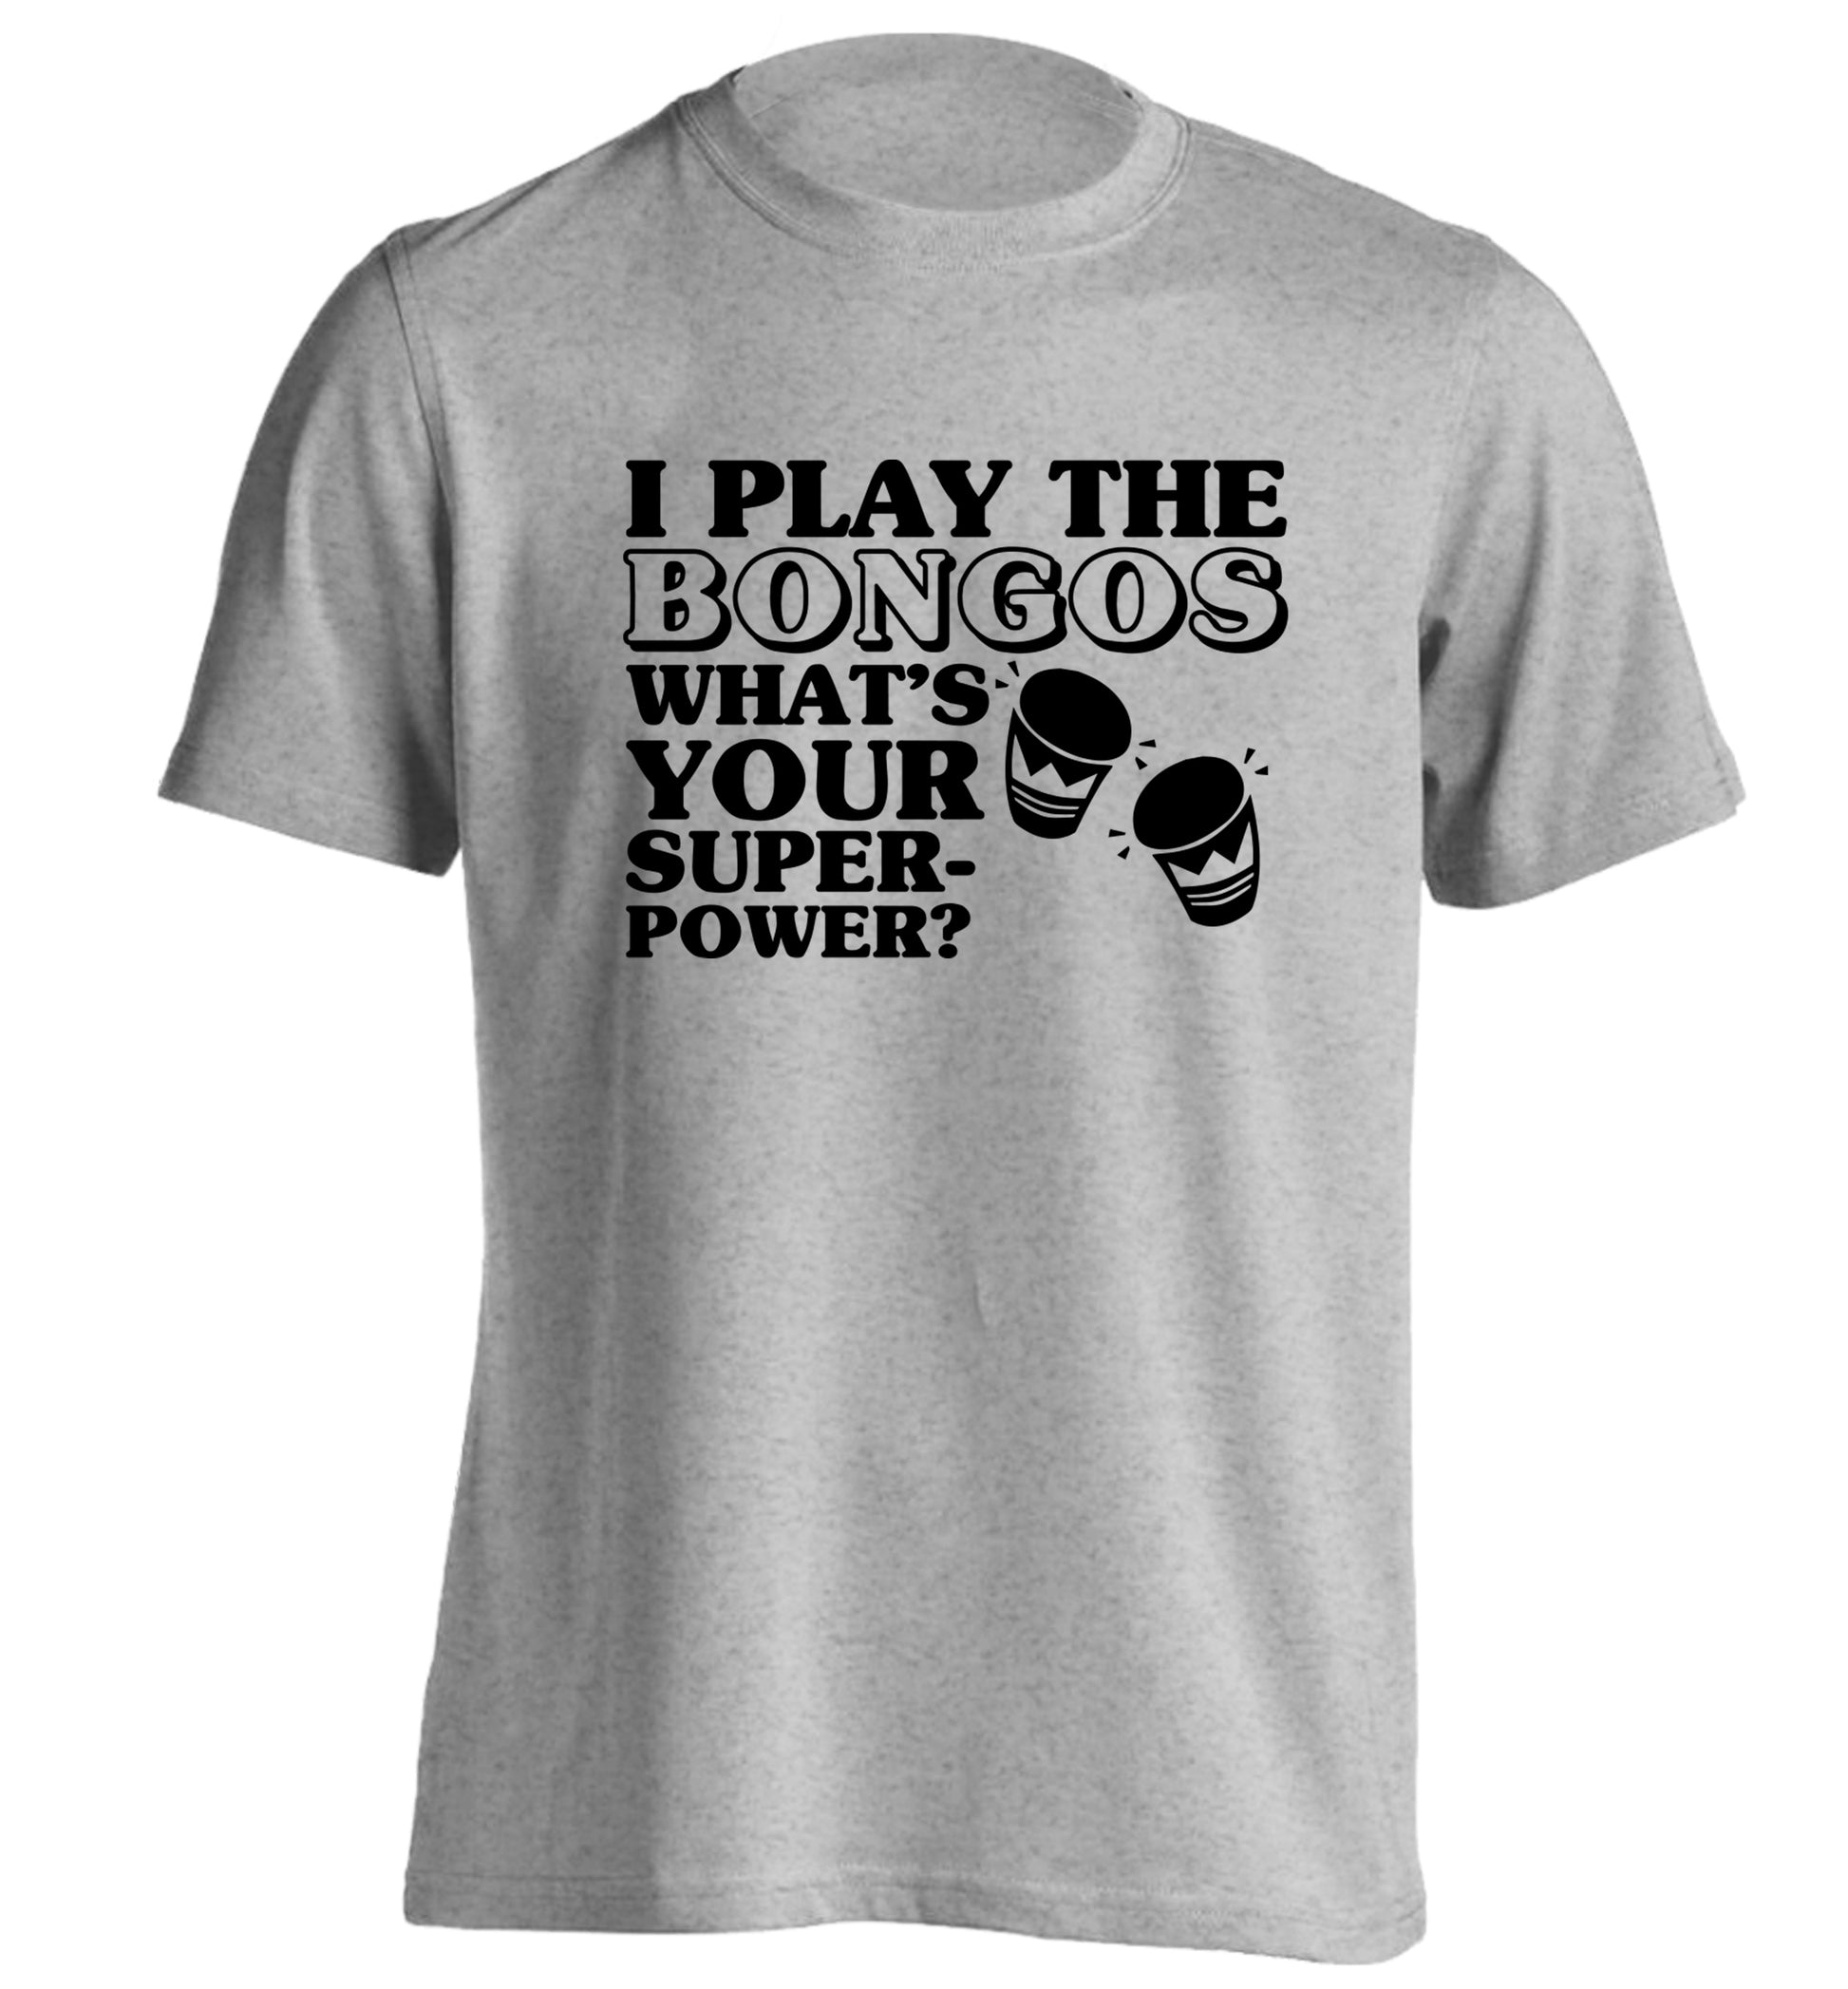 I play the bongos what's your superpower? adults unisexgrey Tshirt 2XL